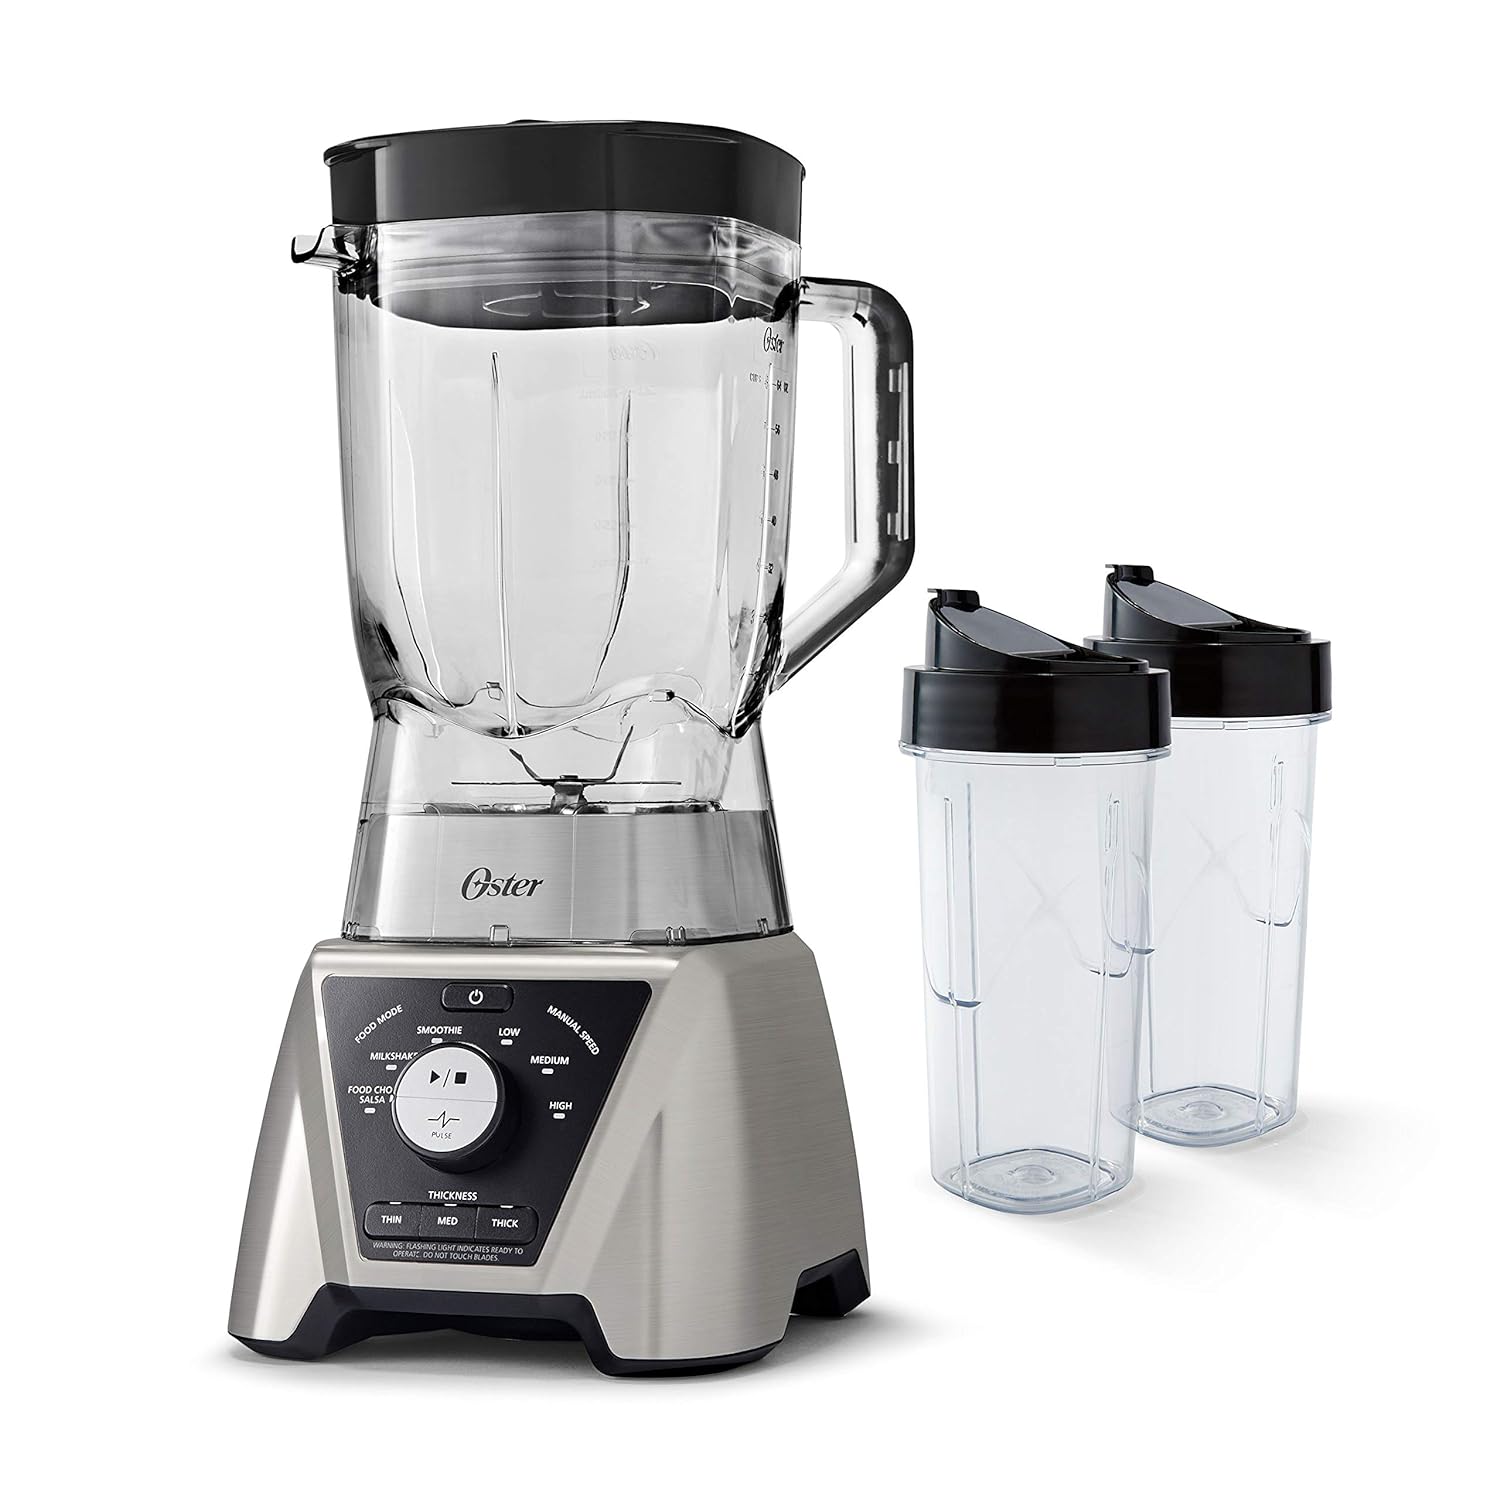 Oster BLSTTS-CB2-000 Pro Blender with Texture Select Settings, 2 Blend-N-Go Cups and Tritan Jar, 64 Ounces, Brushed Nickel?